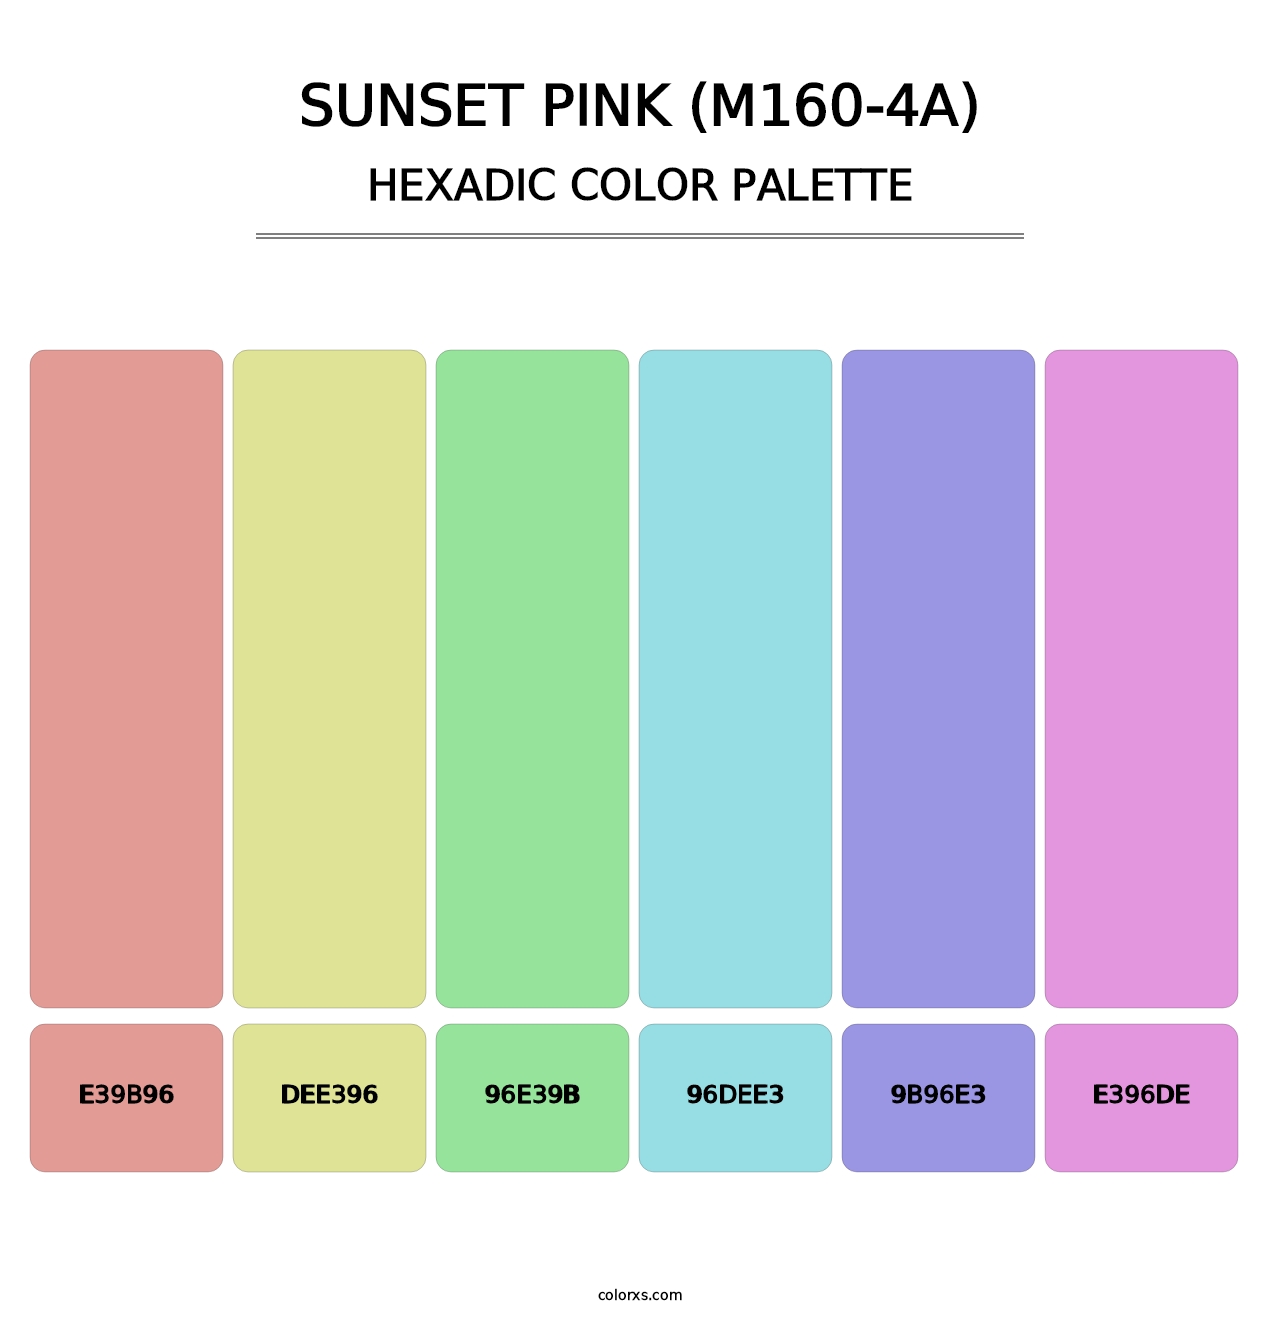 Sunset Pink (M160-4A) - Hexadic Color Palette